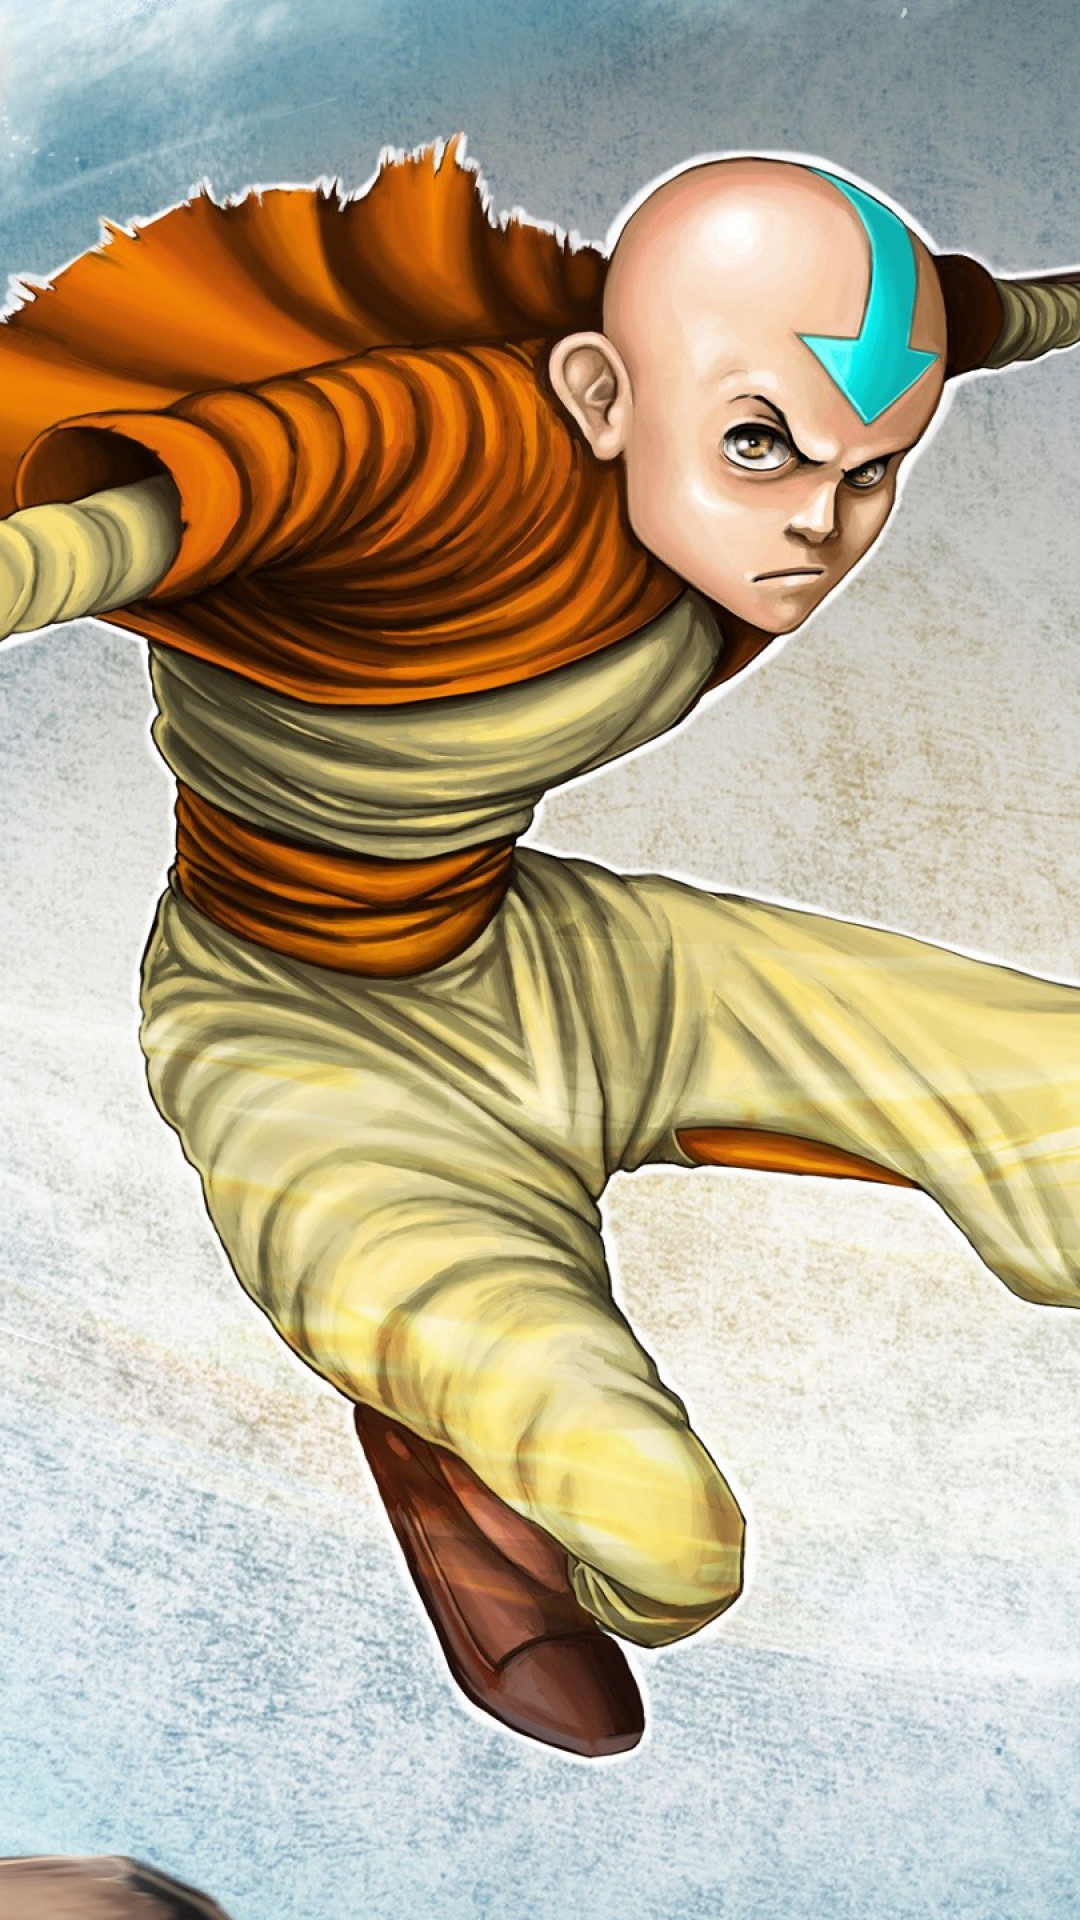 Avatar The Last Airbender Wallpaper Hd For Android  Avatar The Last  Airbender  1080x1920 Wallpaper  teahubio